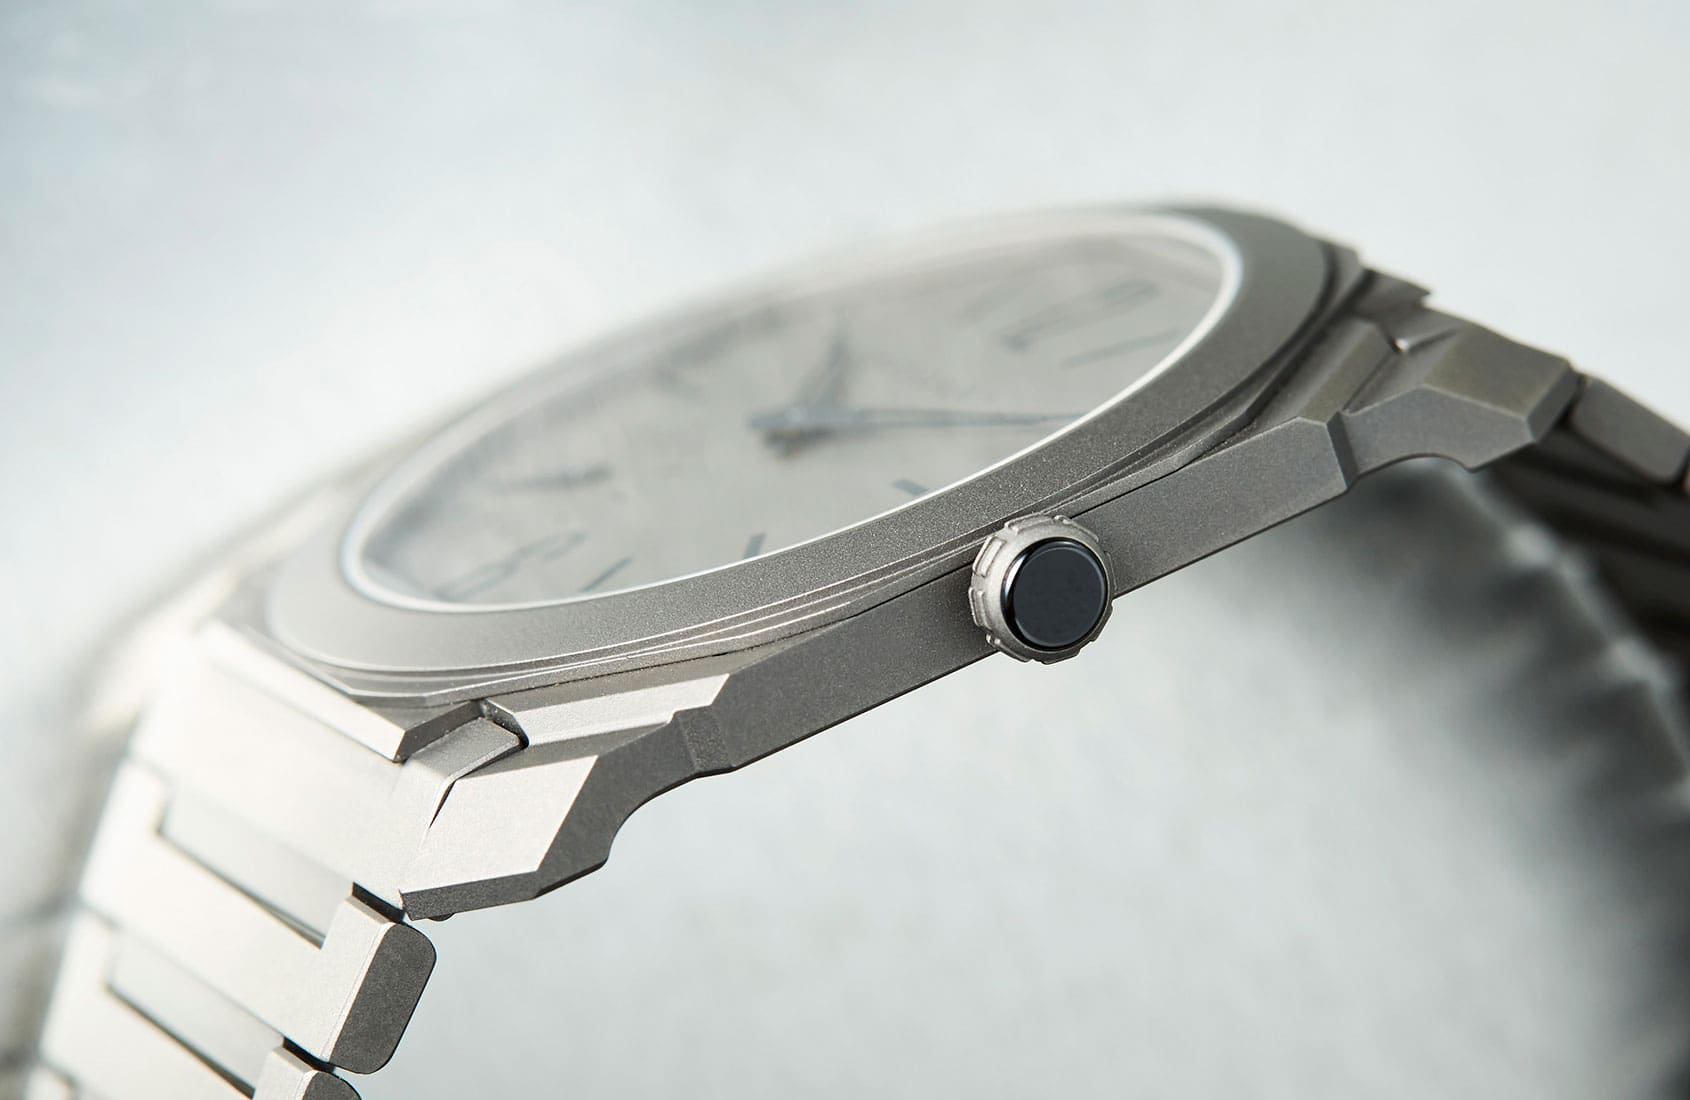 How Thin is the Bulgari Octo Finissimo Automatic? – Video Review